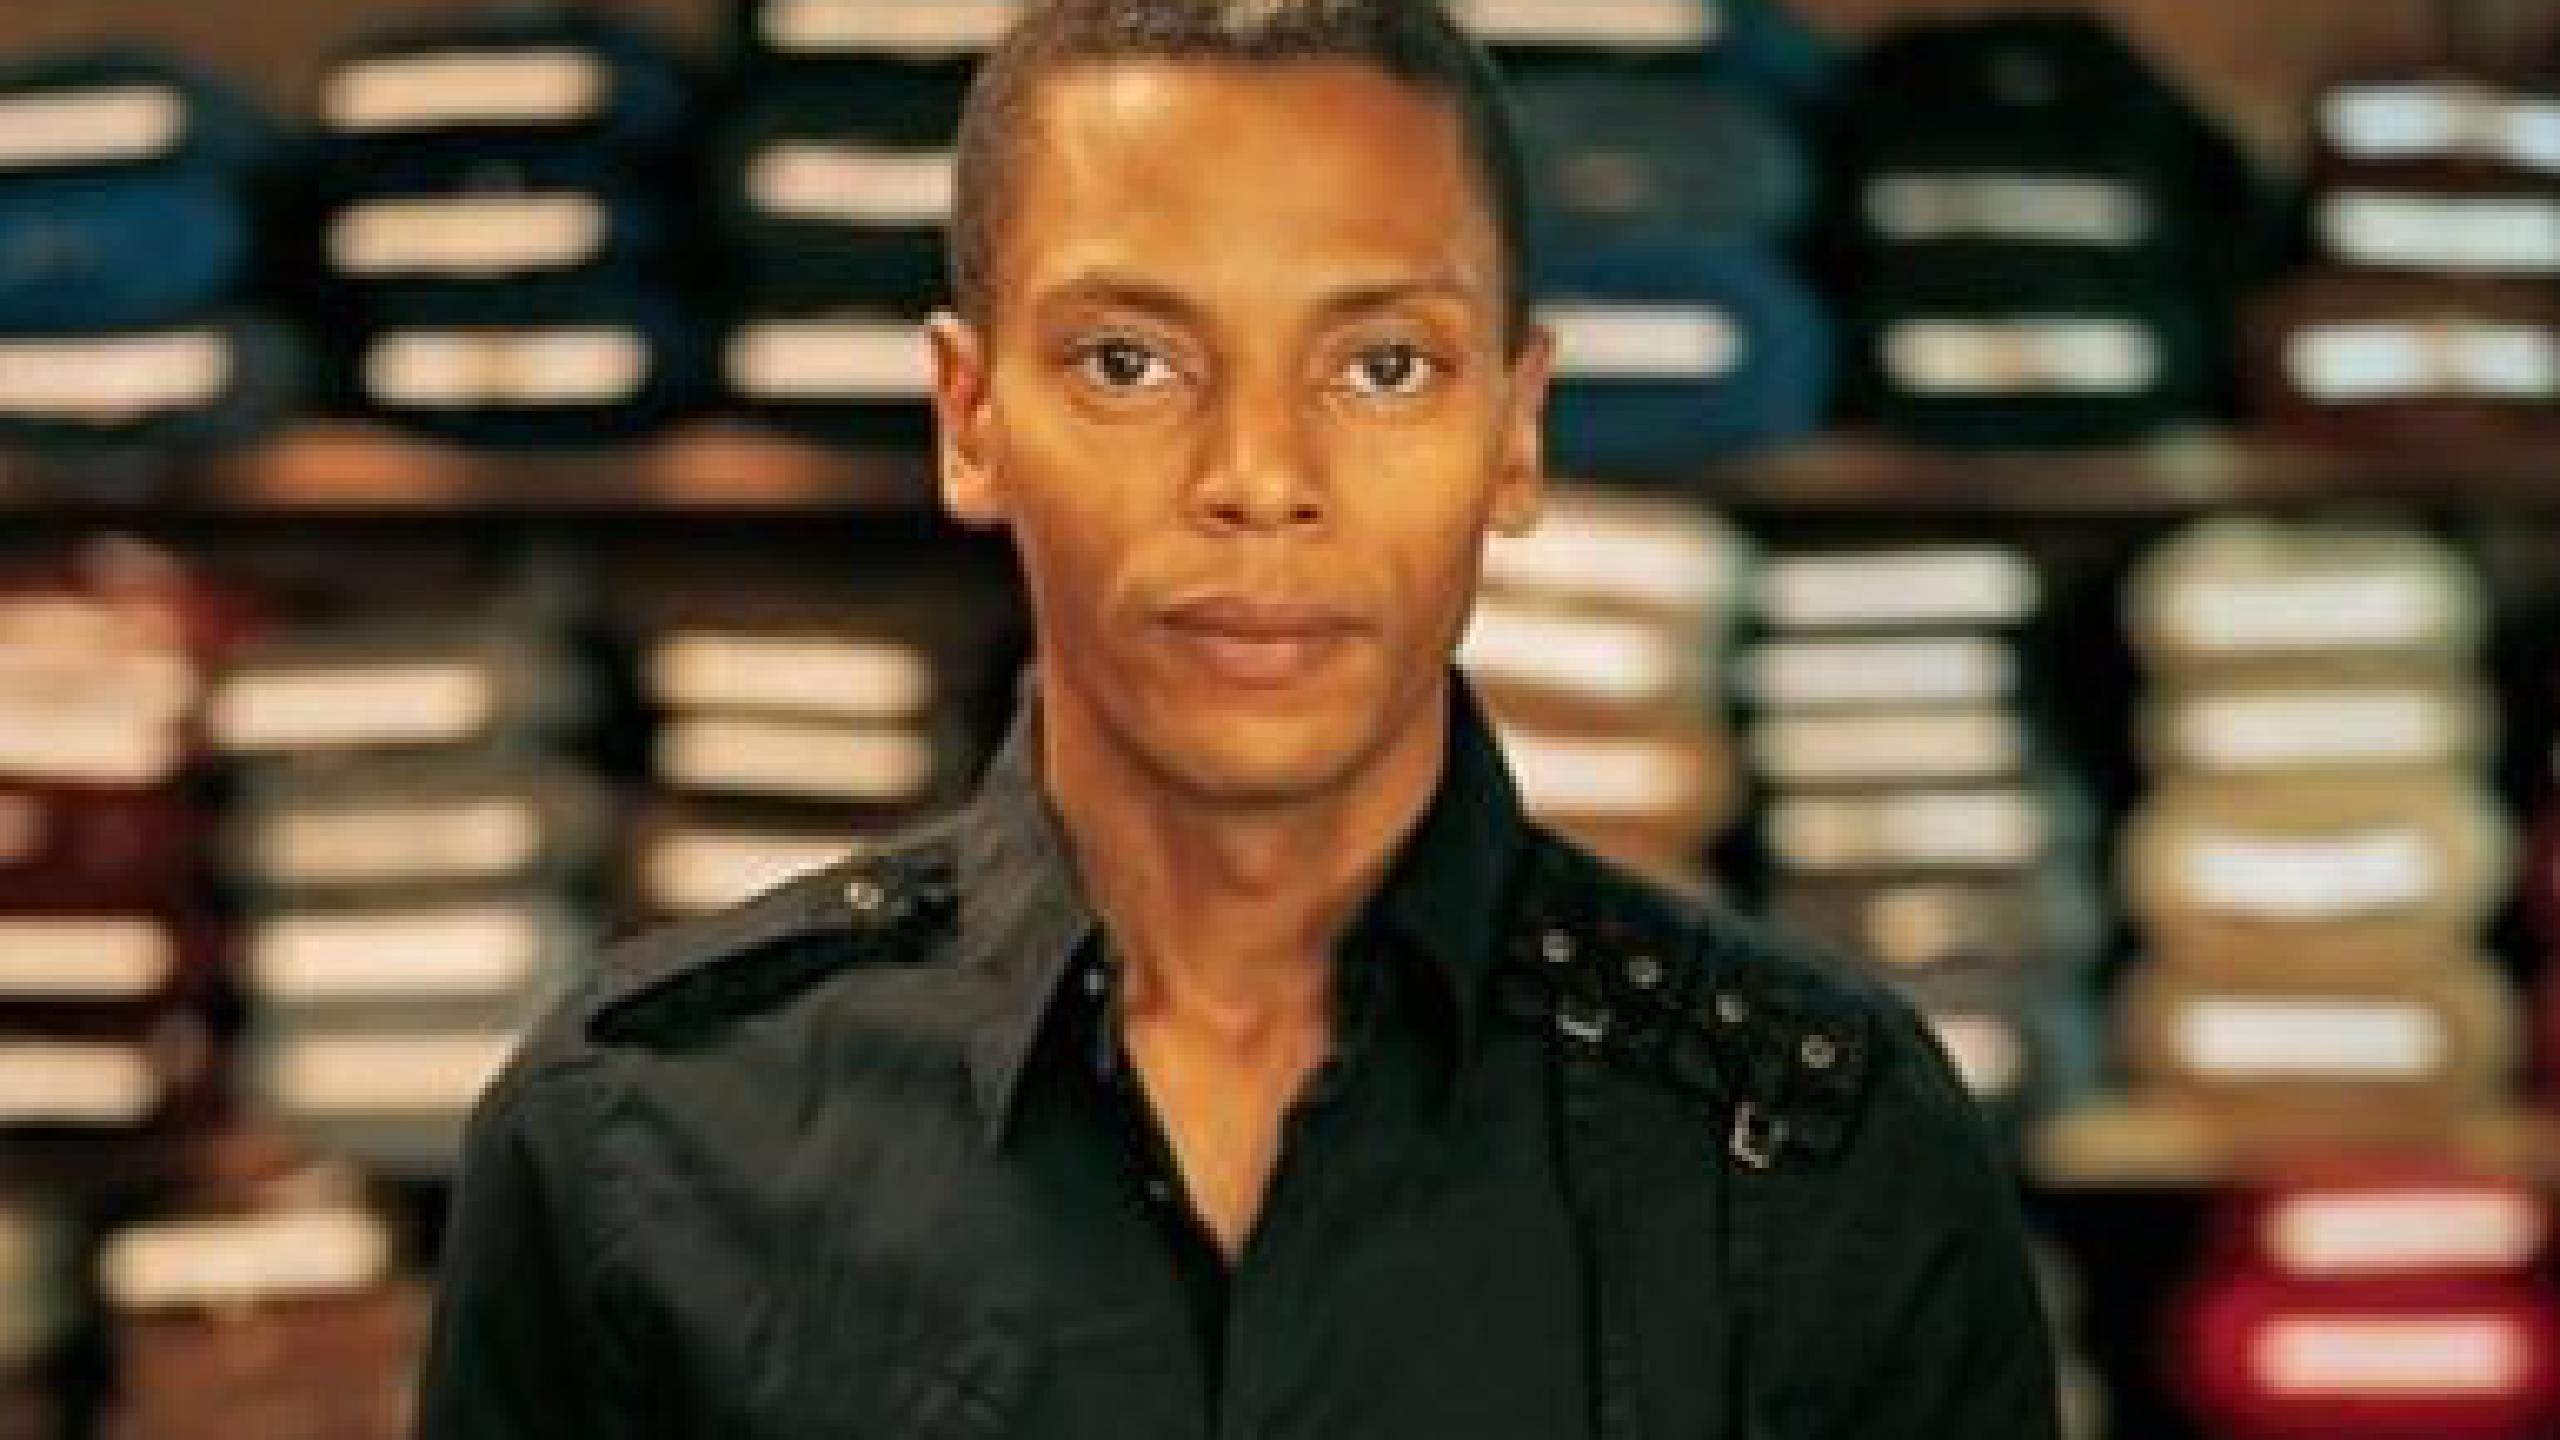 Jeff Mills tour dates 2022 2023. Jeff Mills tickets and concerts